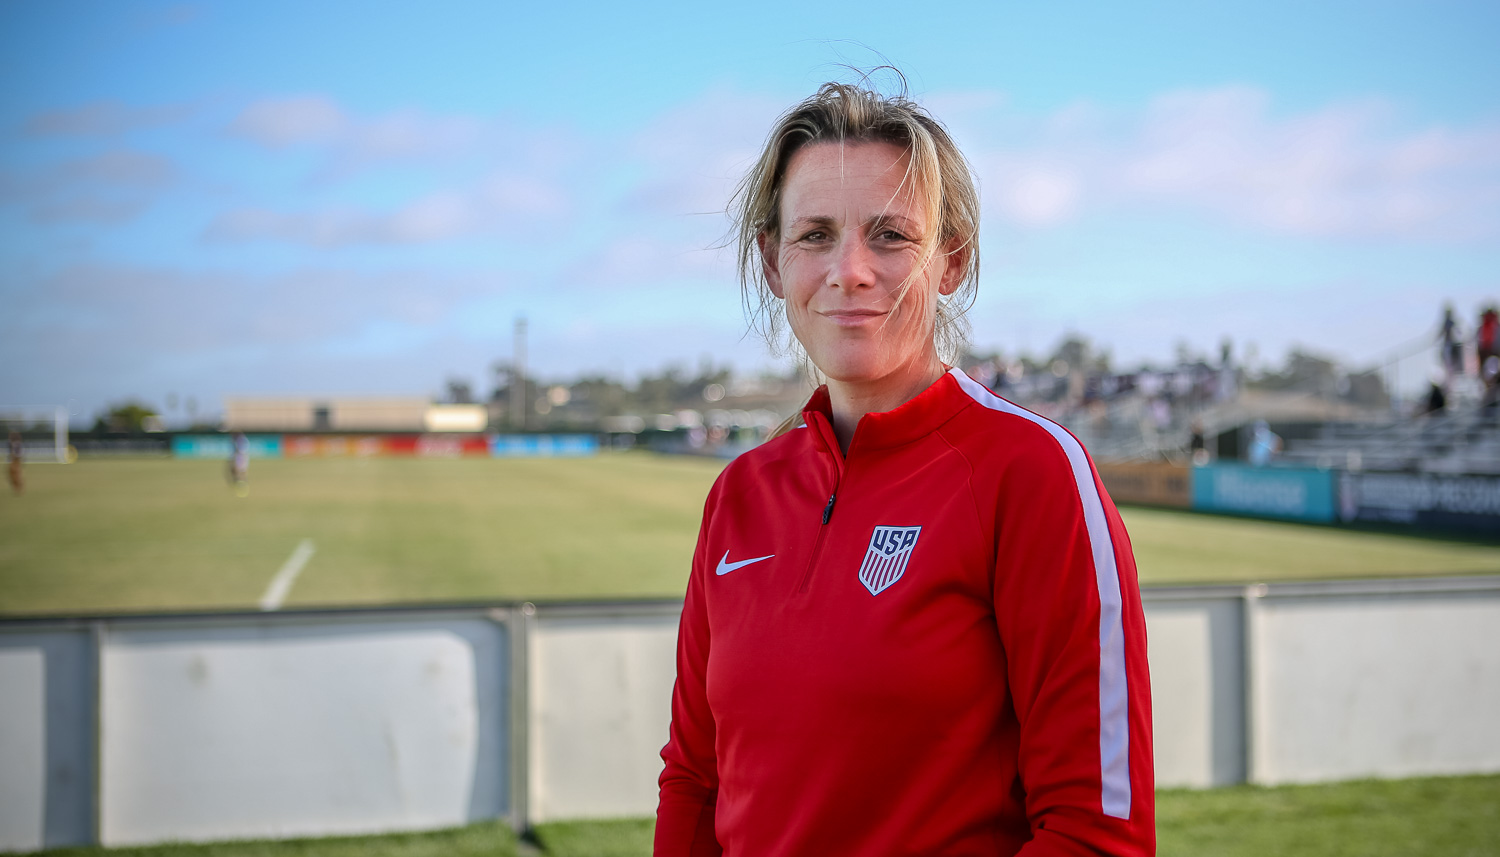 Scouting Players for the US National Team | #USSDA #WomensWorldCup